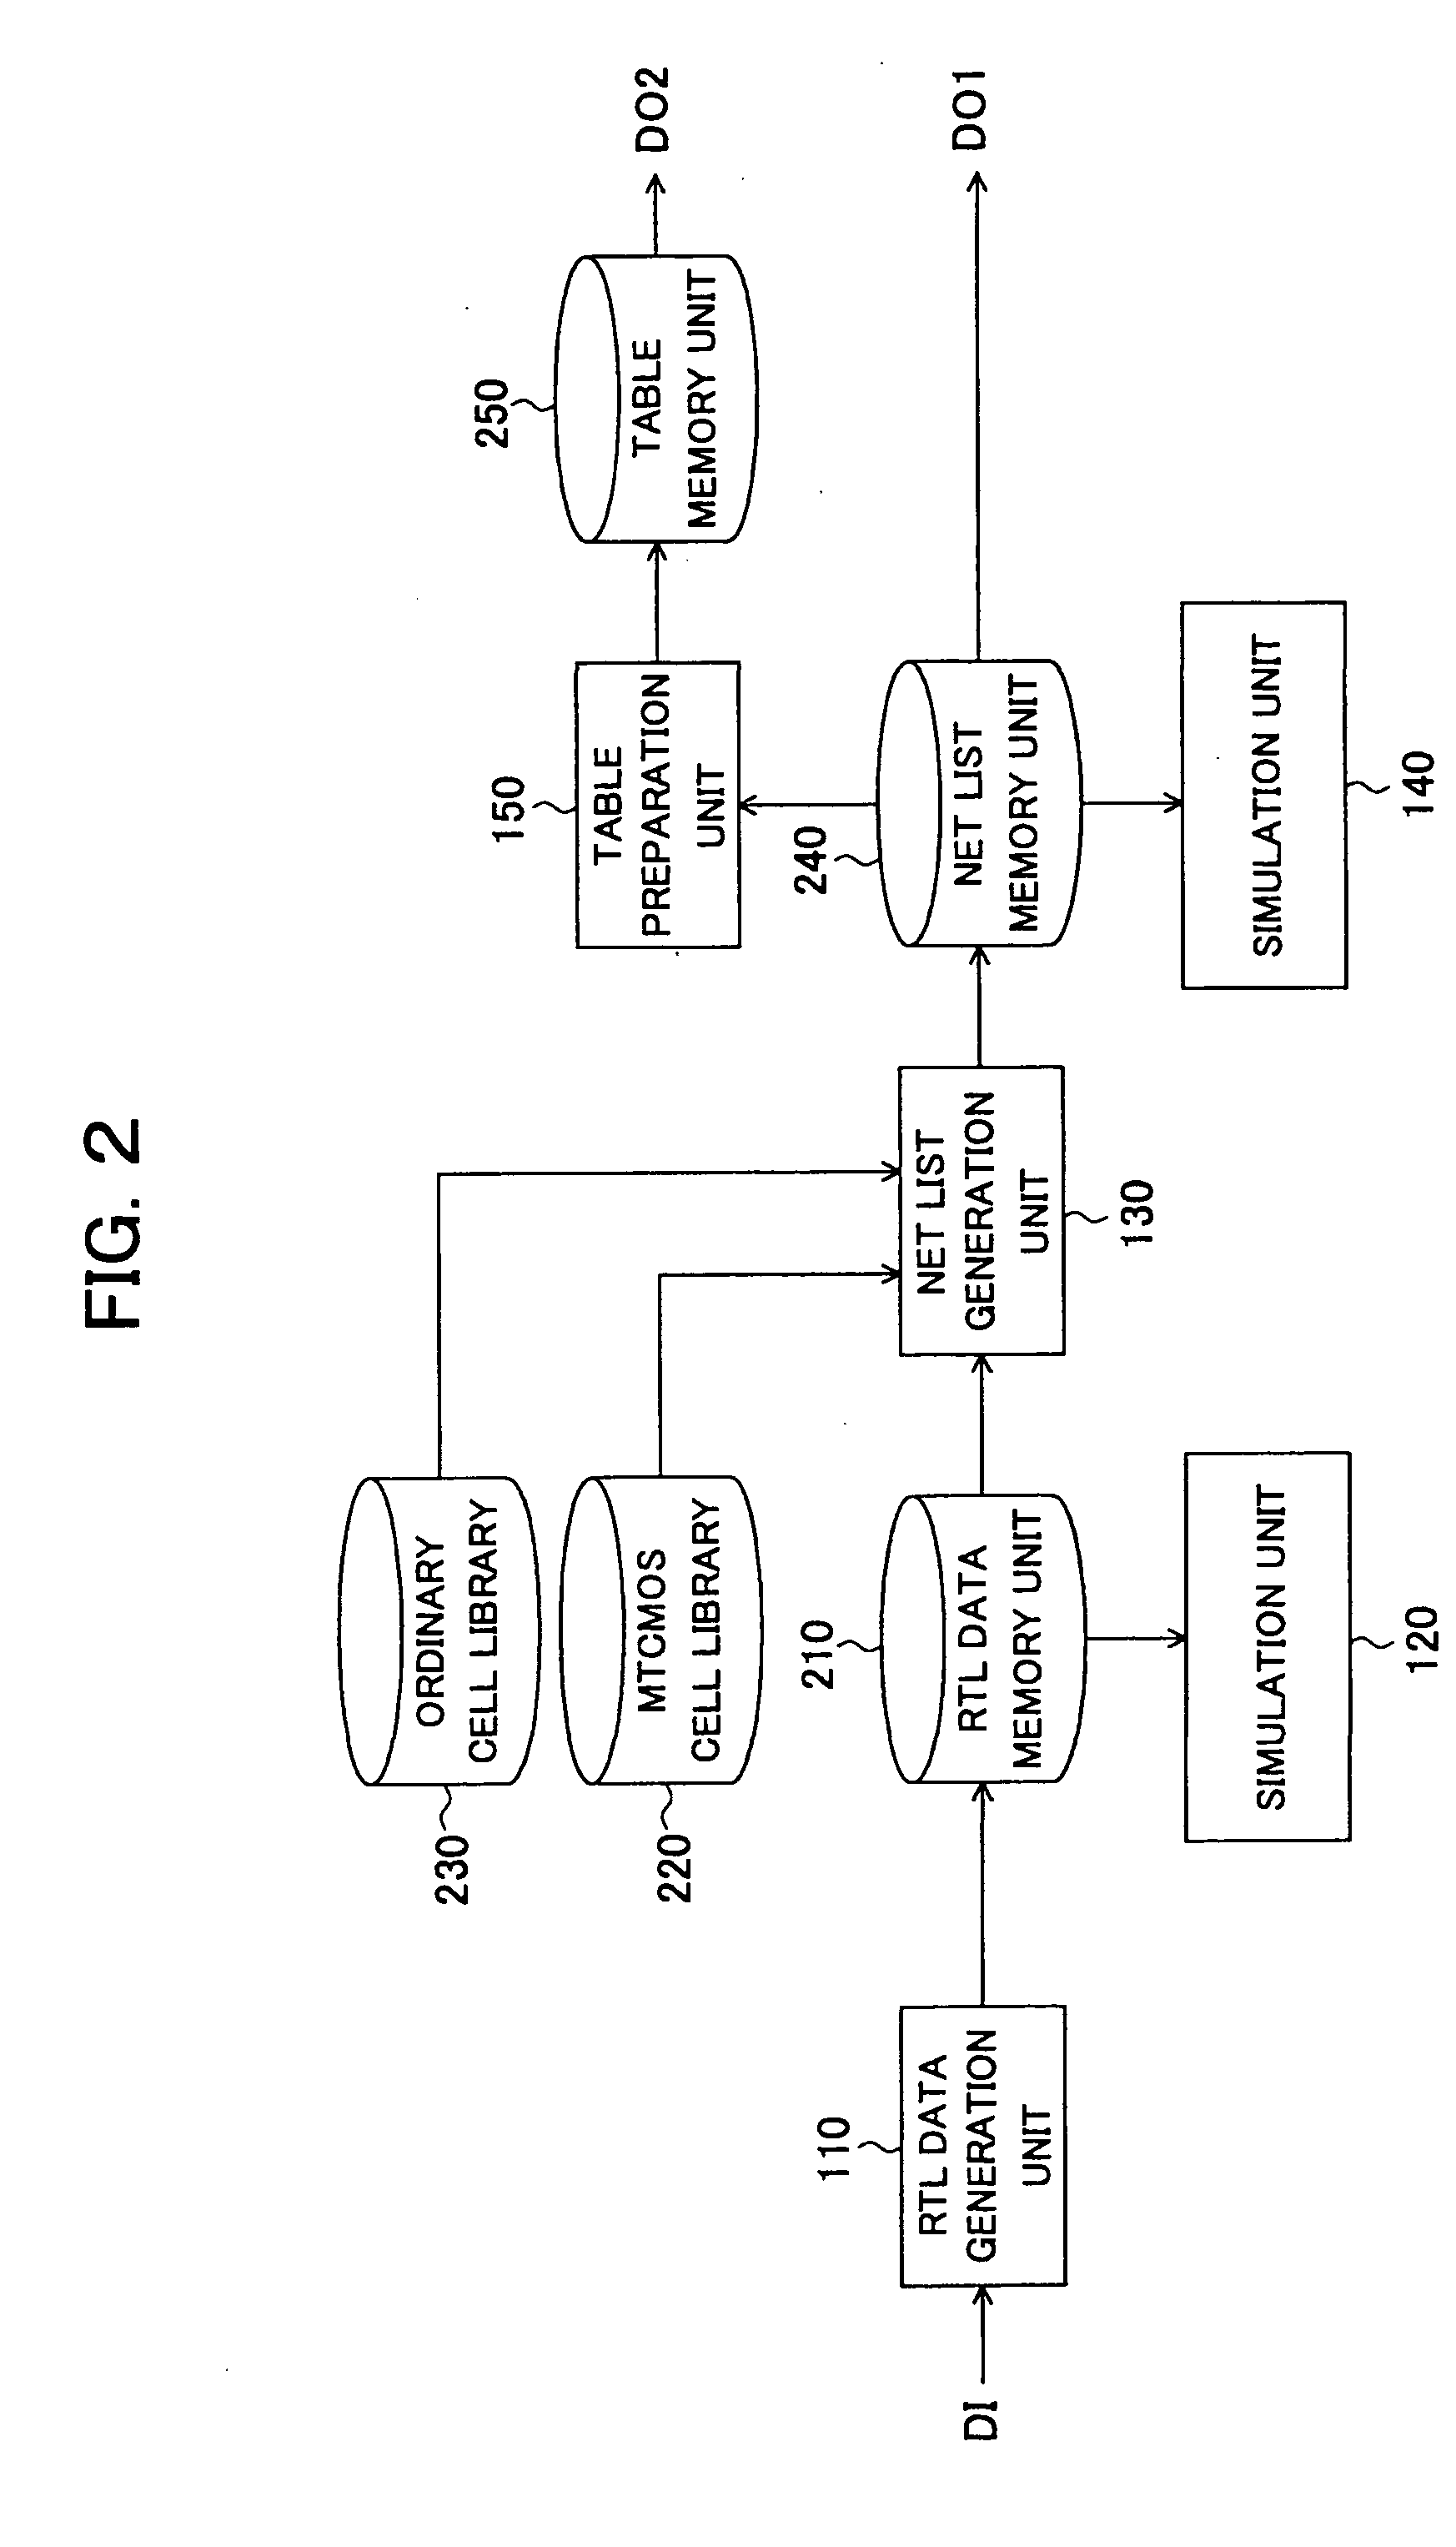 Integrated circuit design system, integrated circuit design program, and integrated circuit design method